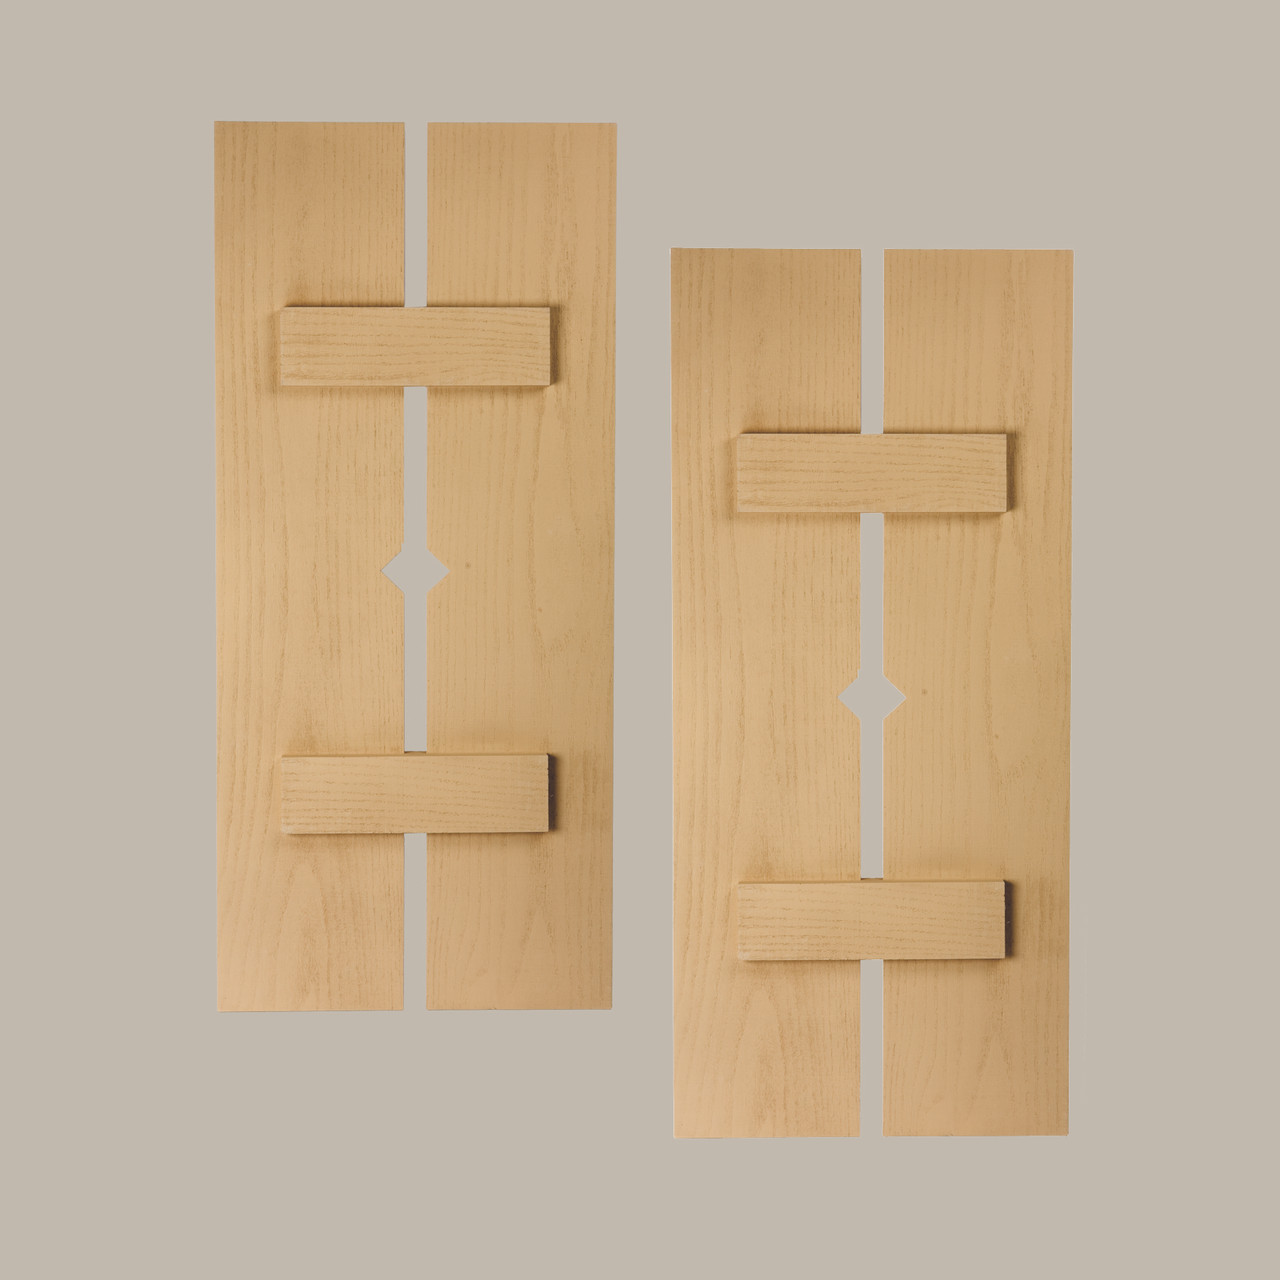 12 inch by 63 inch Plank Shutter with 2-Plank, Diamond